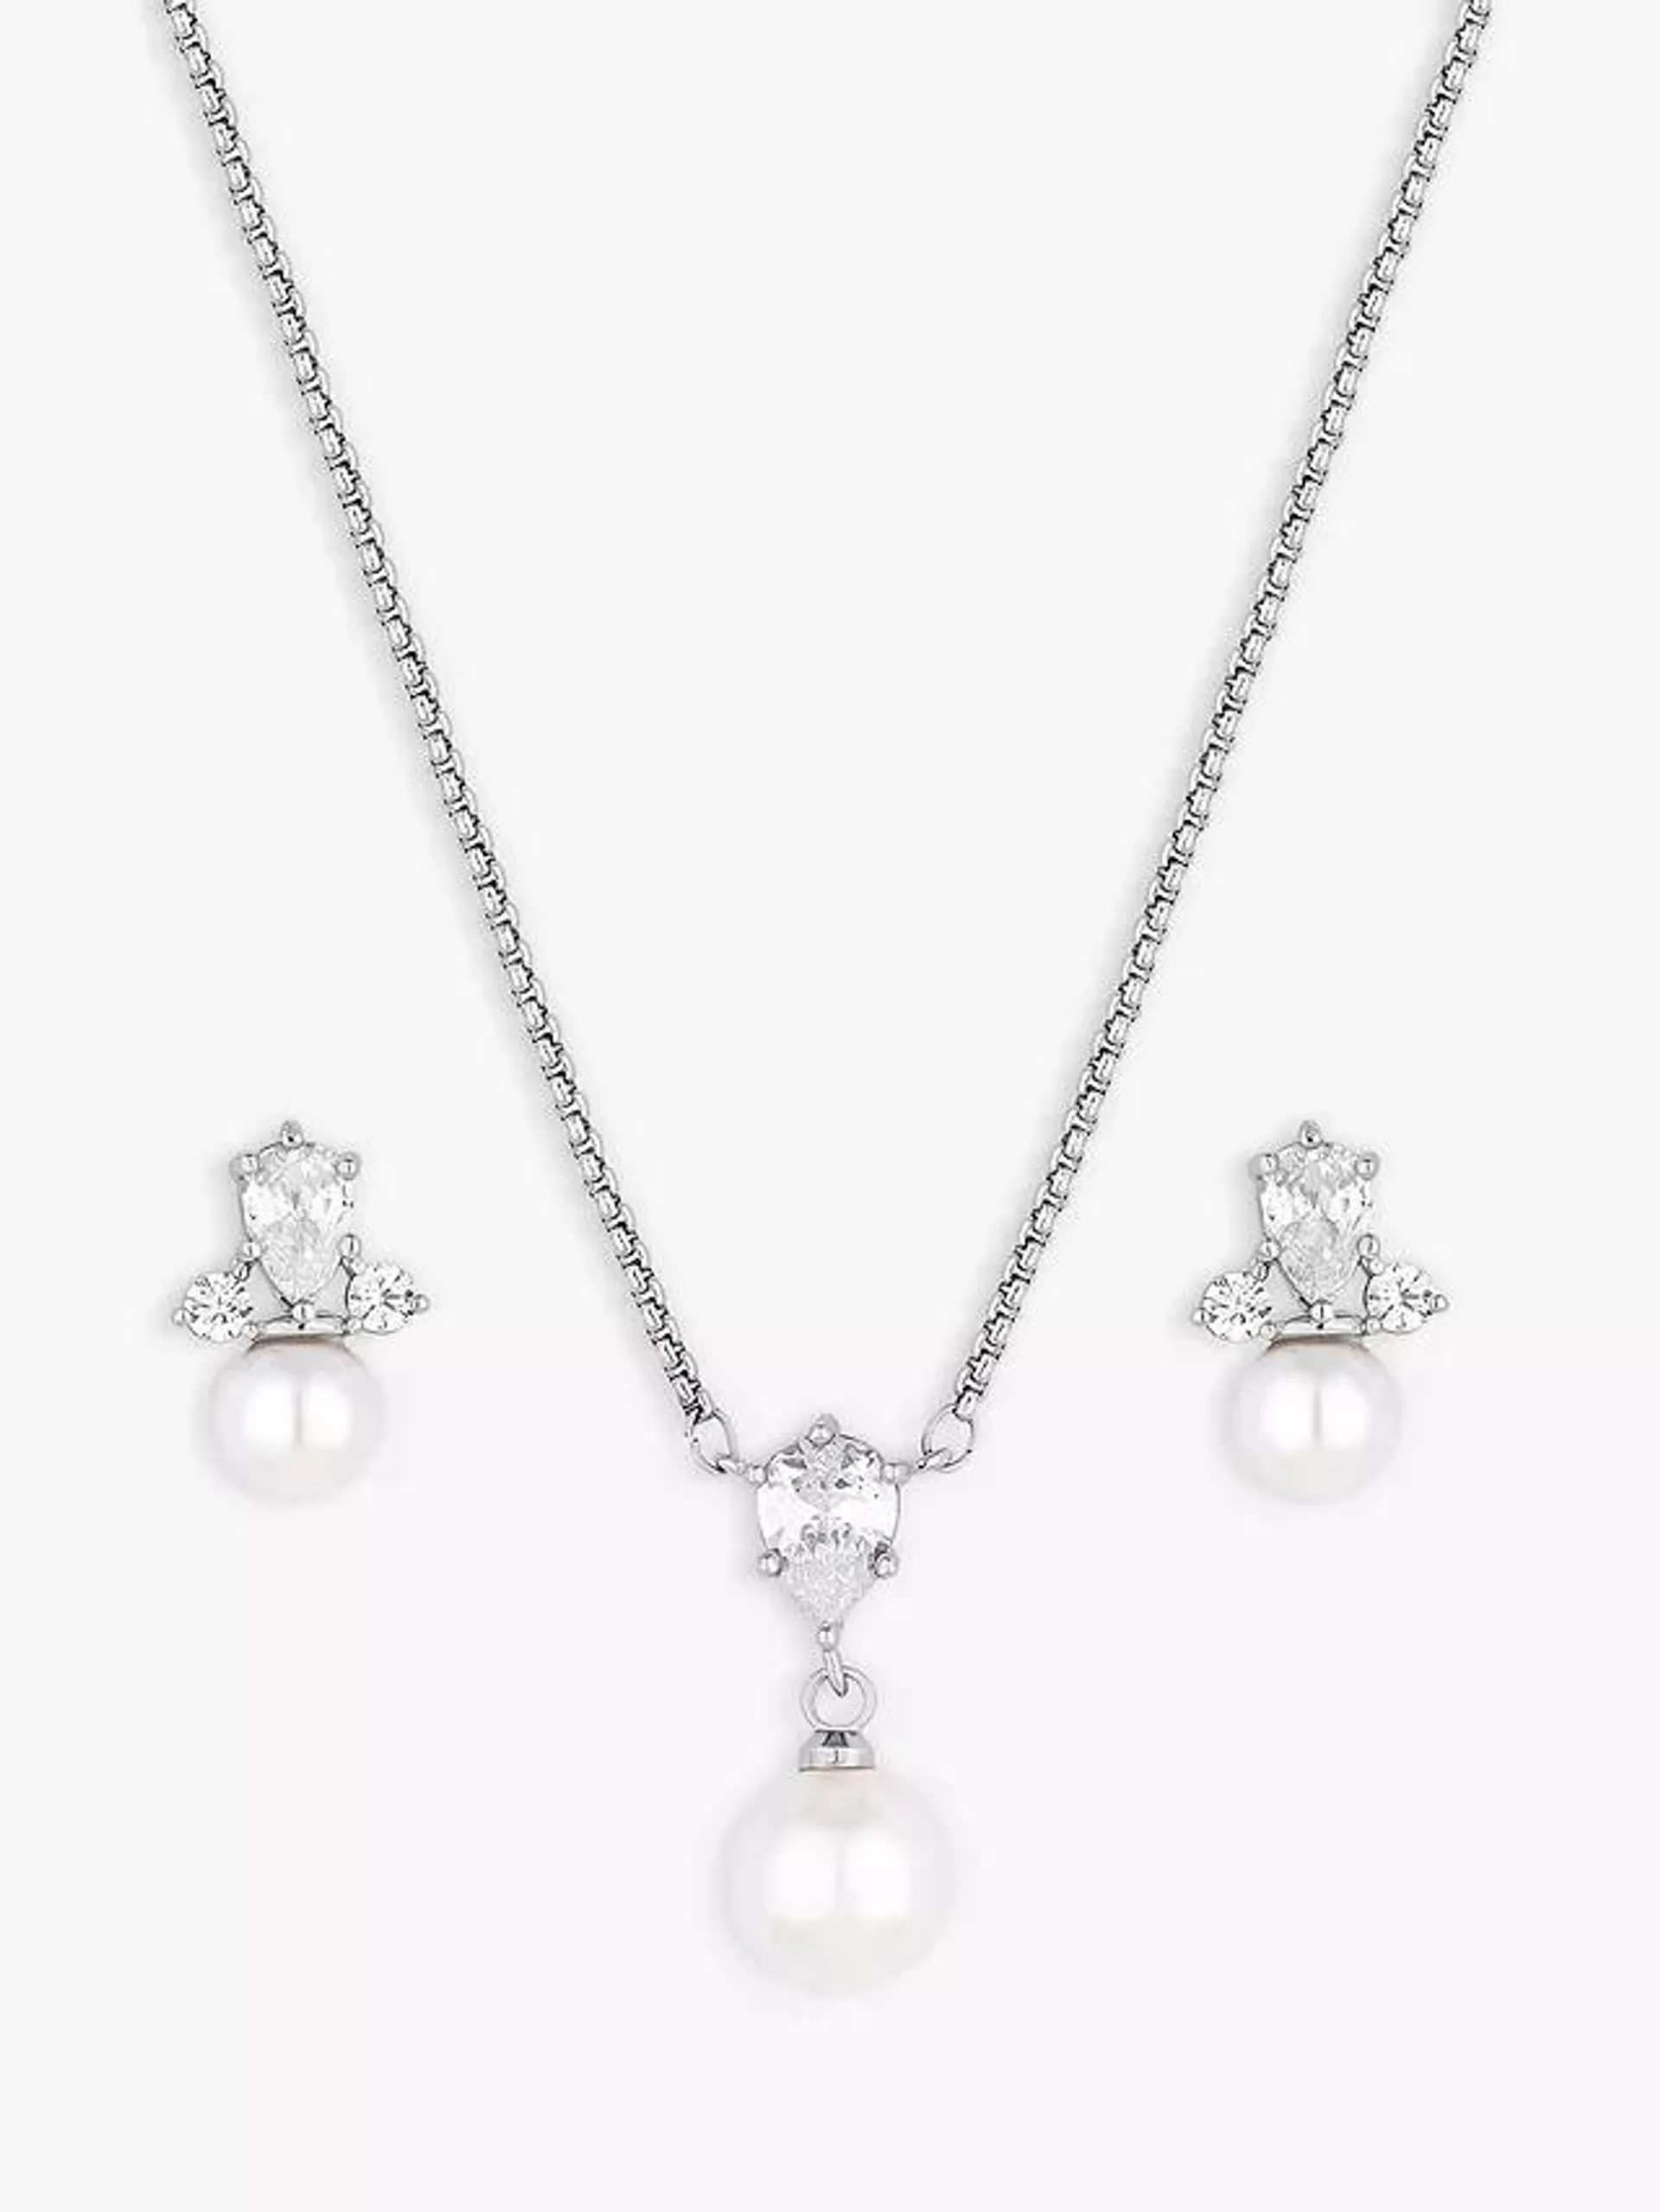 Jon Richard Rhodium Plated And Pearl Necklace and Earrings Set, Silver